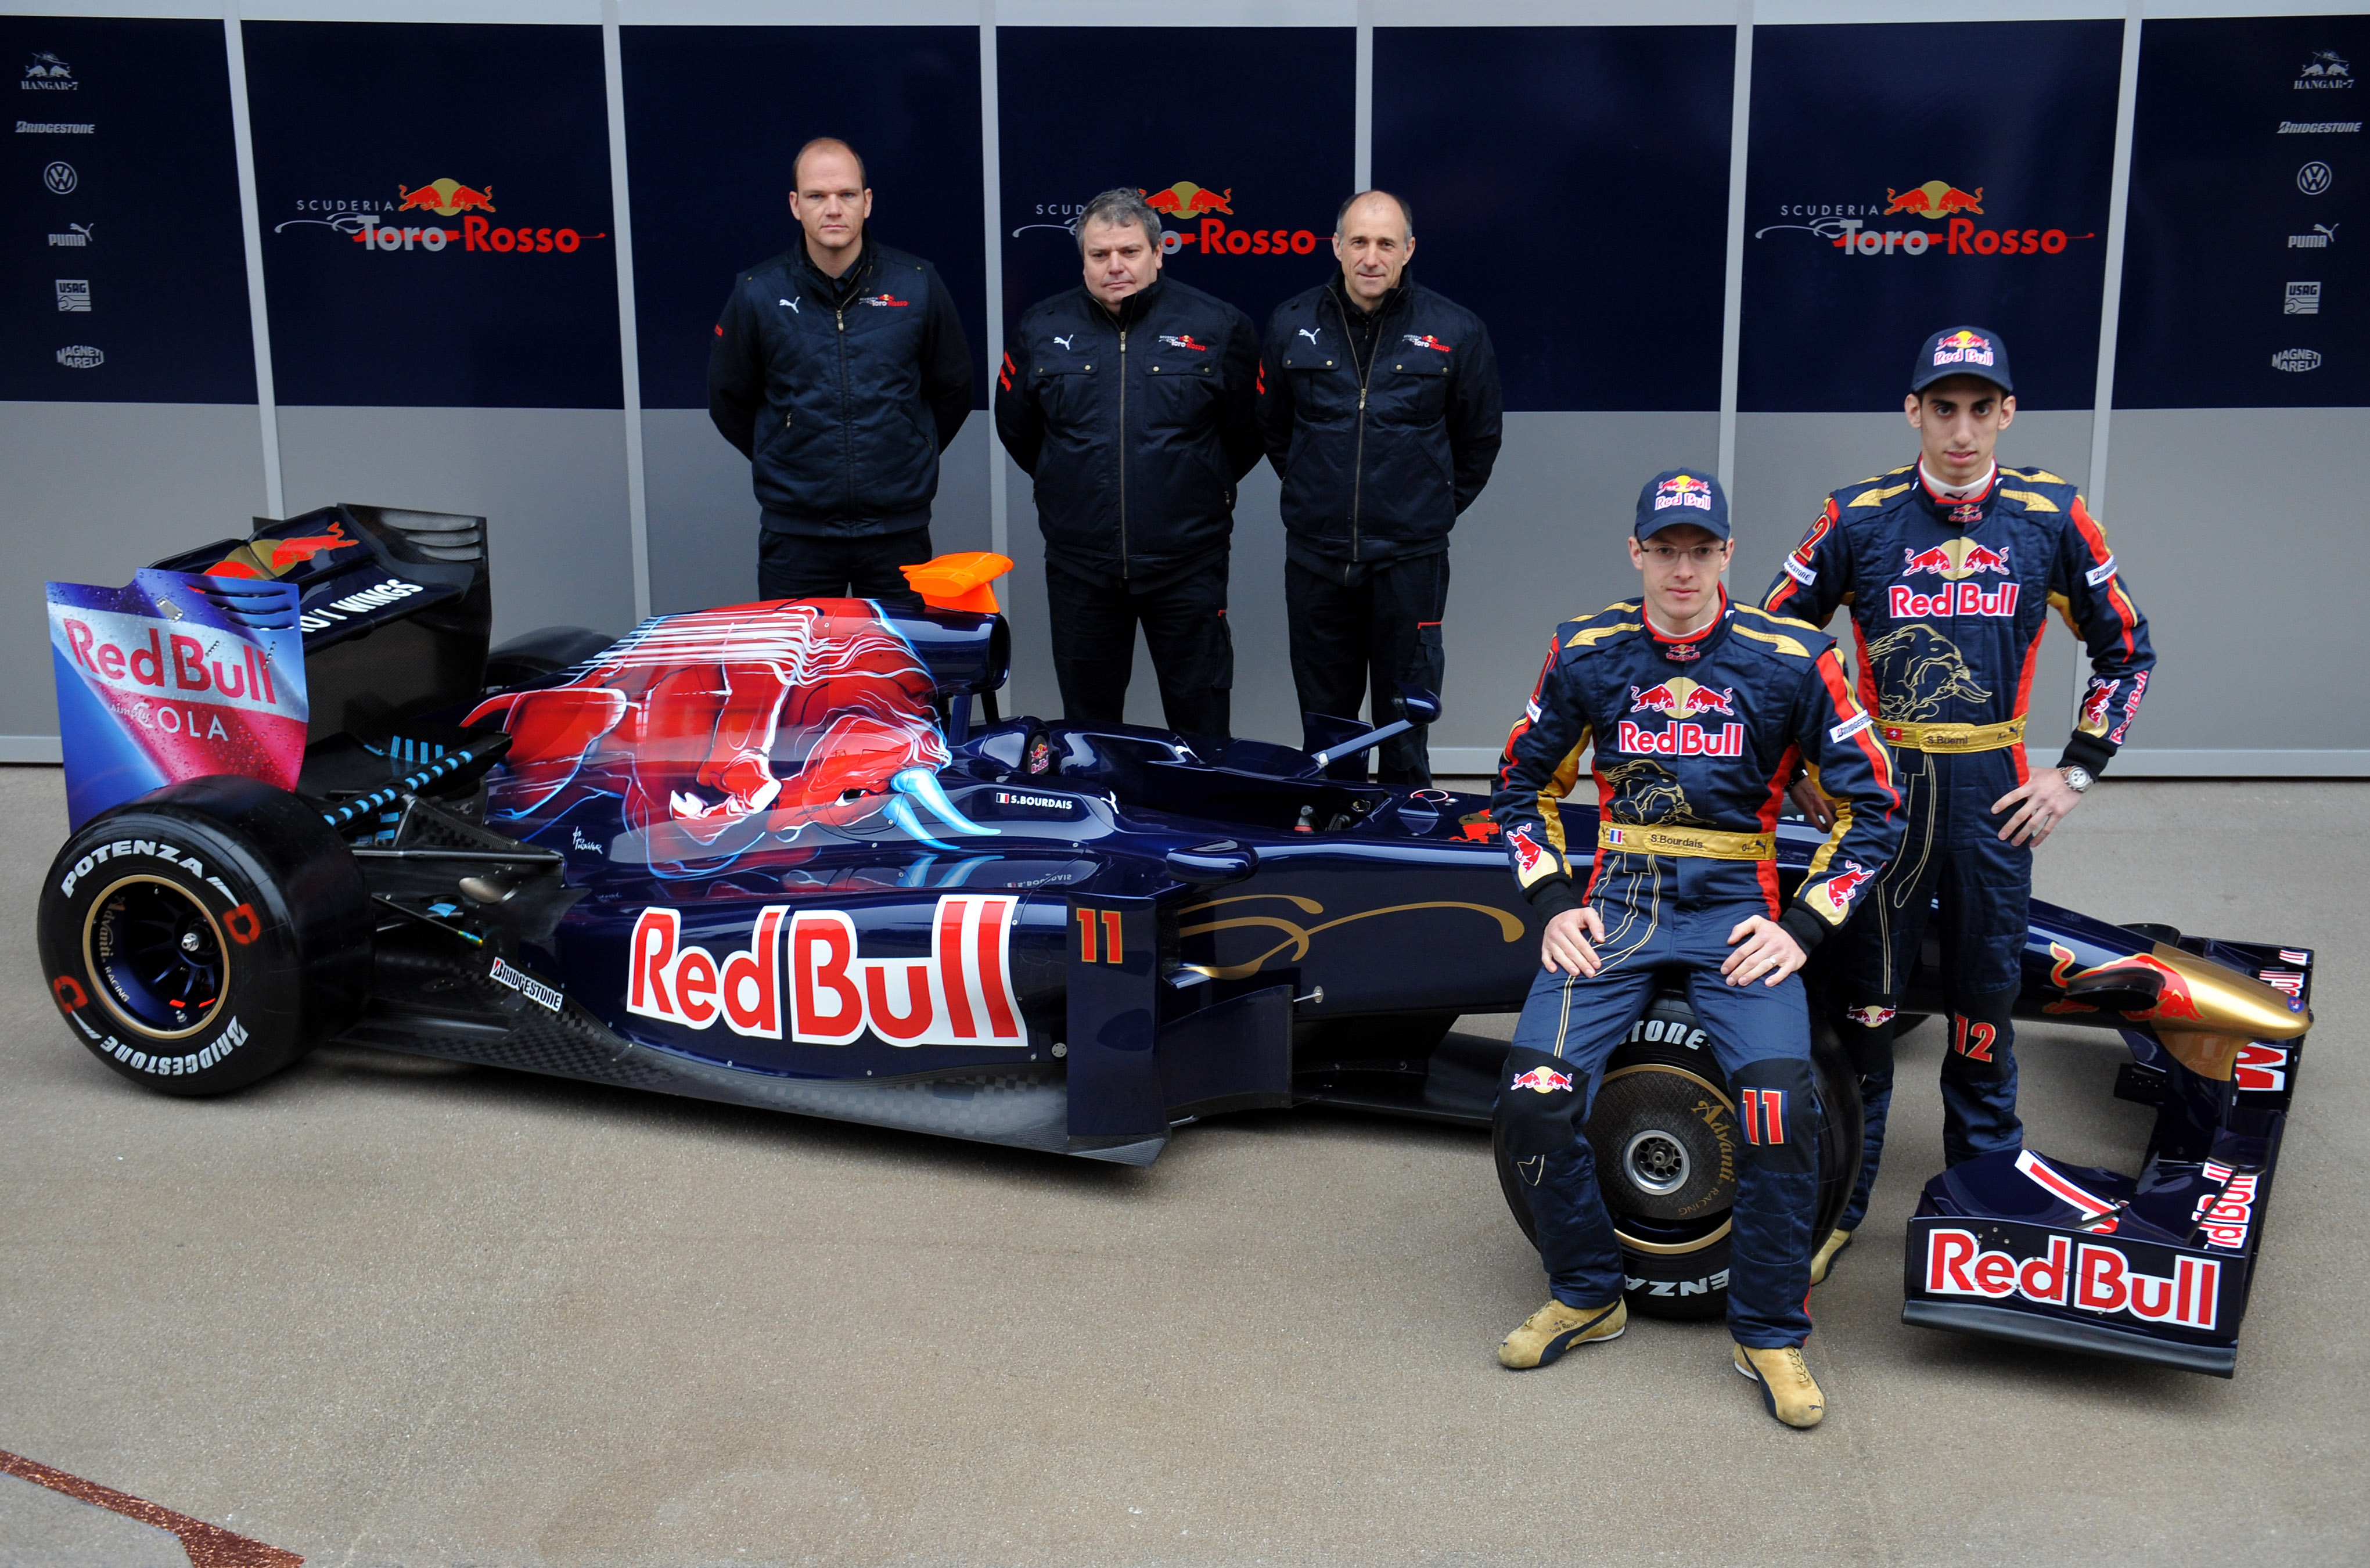 BARCELONA, SPAIN - MARCH 09:  Drivers Sebastien Bourdais (2nd R) and Sebastien Buemi (R) of team Toro Rosso pose with the team principle Franz Tost (3rd R), technical director Giorgio Ascanelli (2nd L) and Ferrari representative Ernest Knoors (L) as they